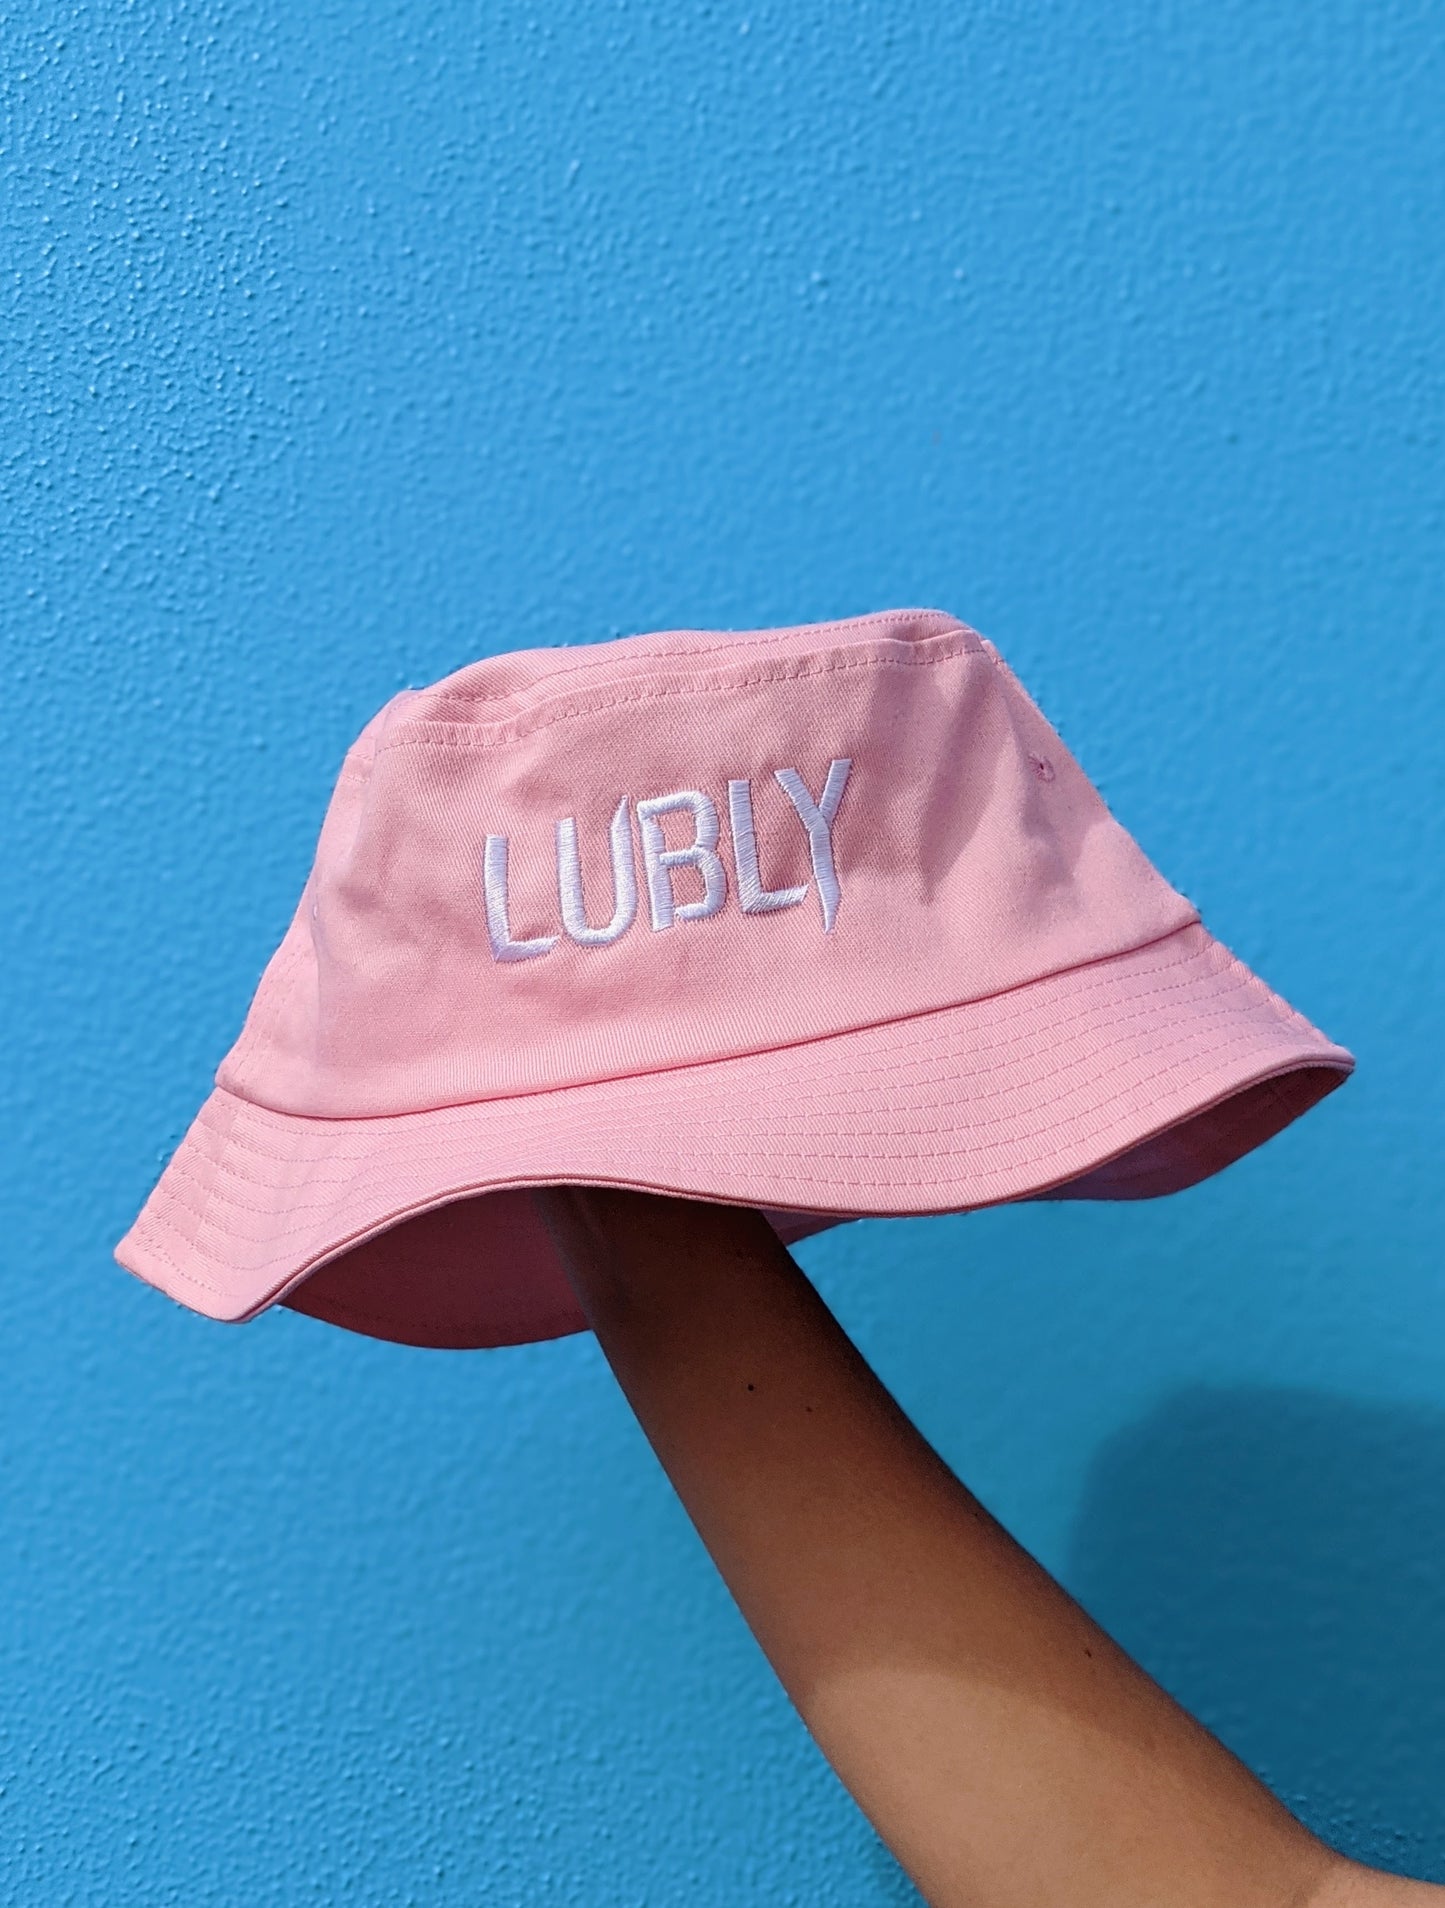 Lubly Bucket Hat